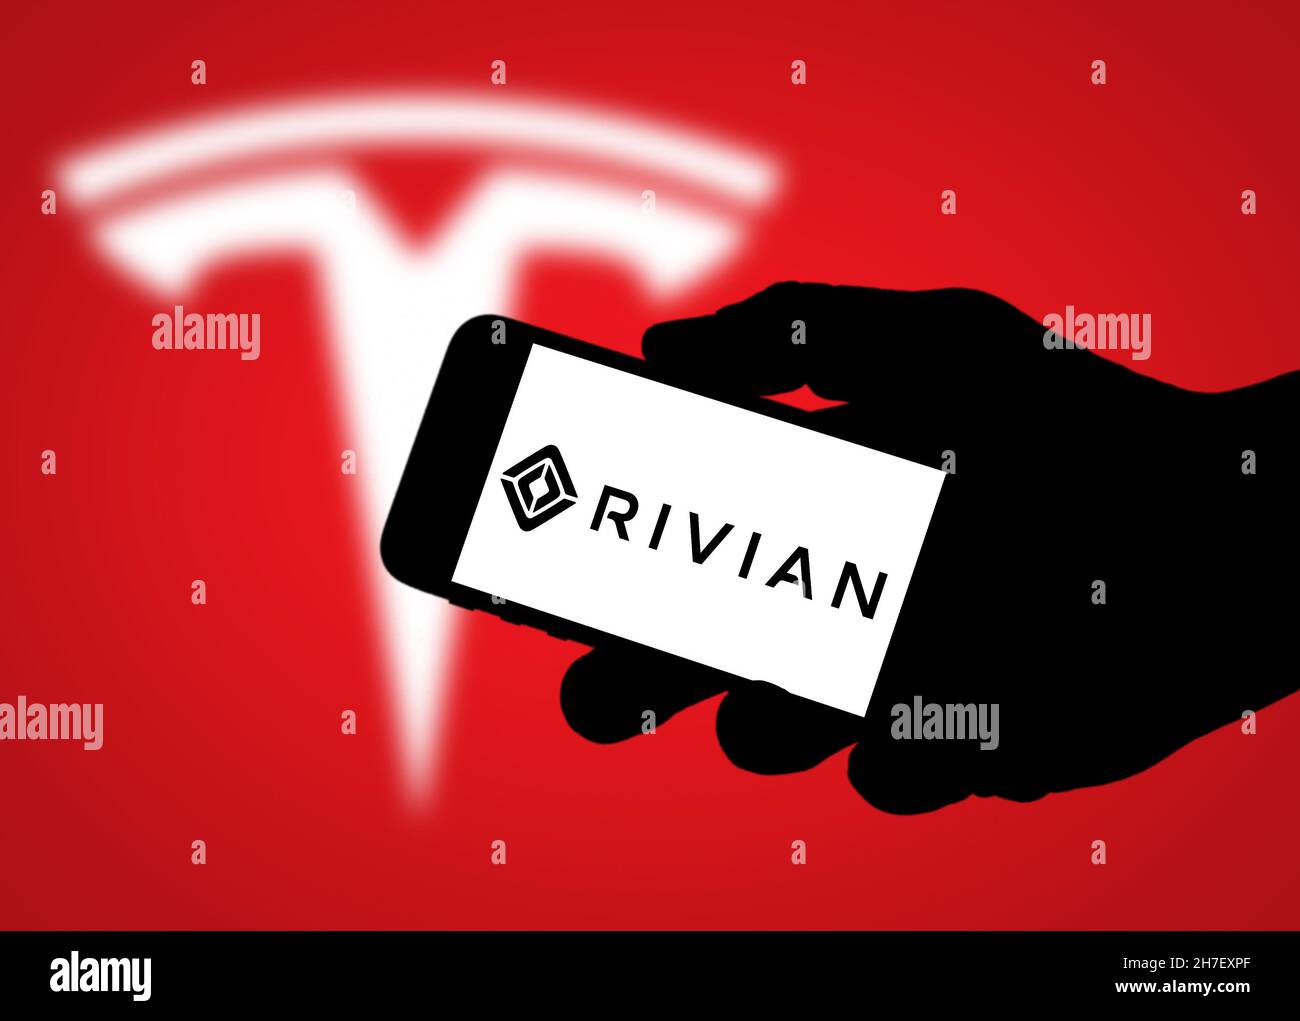 Rivian - American electric vehicle automaker Stock Photo